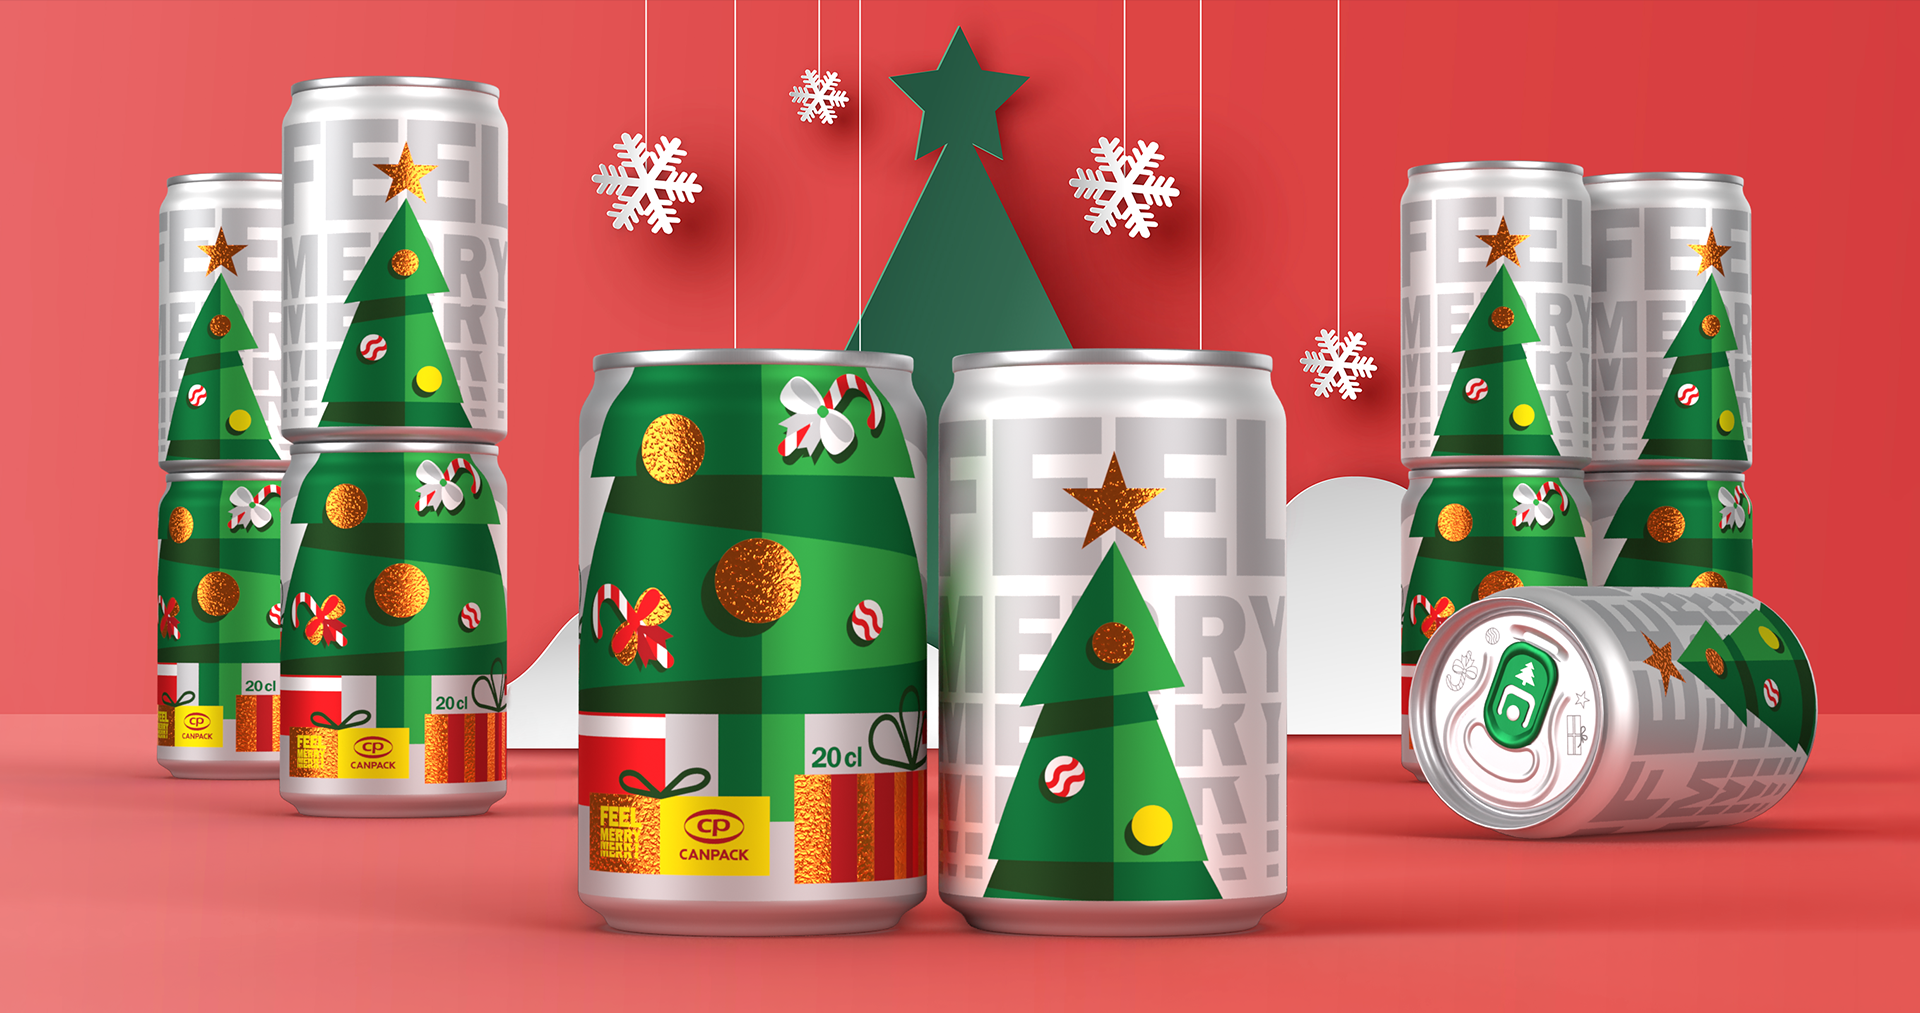 Beverage cans - recyclable aluminum beverage packaging - CANPACK